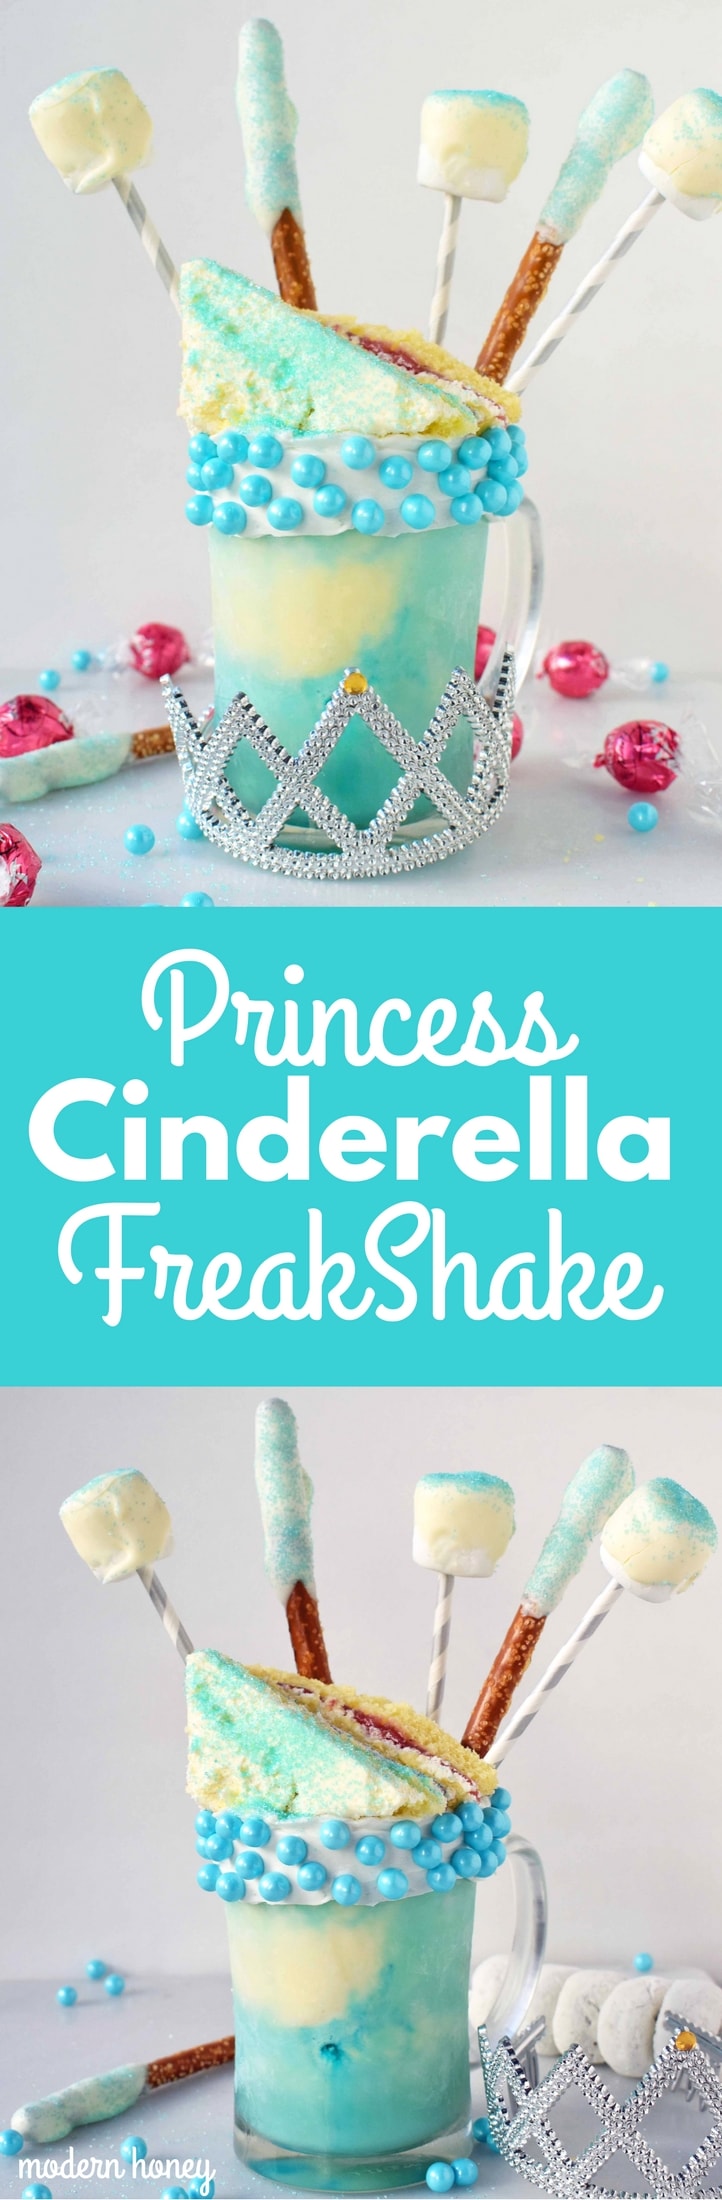 Princess Cinderella FreakShake inspired by the Disney Princess. A vanilla milkshake layered with Cinderella blue tinted ice cream and topped with birthday cake, white chocolate covered pretzels and marshmallows. Perfect for a Princess party or for a Disney lover. www.modernhoney.com